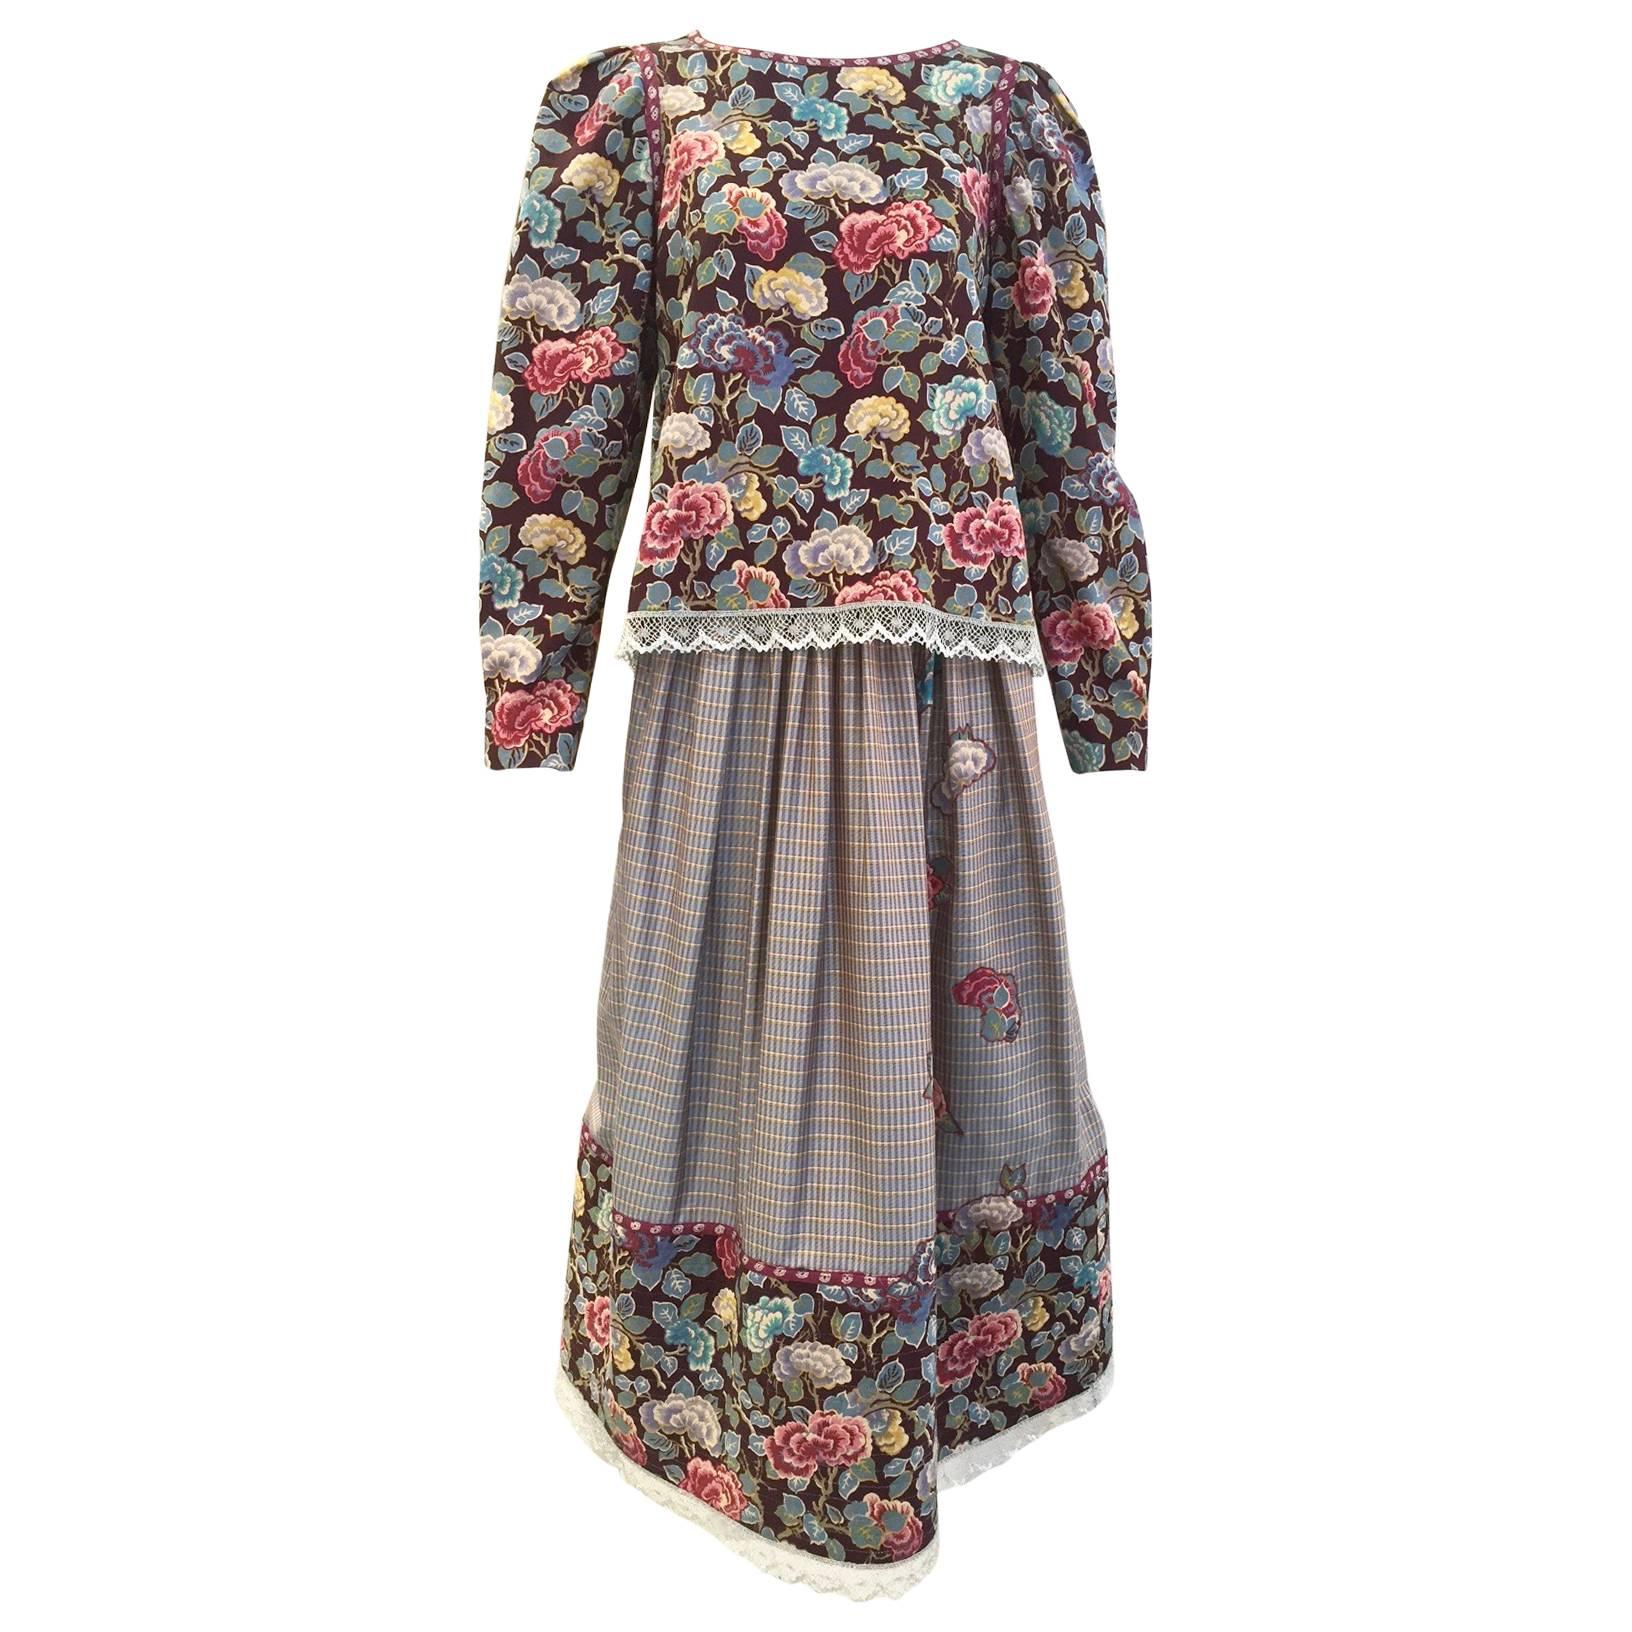 1970s Geoffrey Beene Floral Print Wool Crepe Blouse and Skirt Set